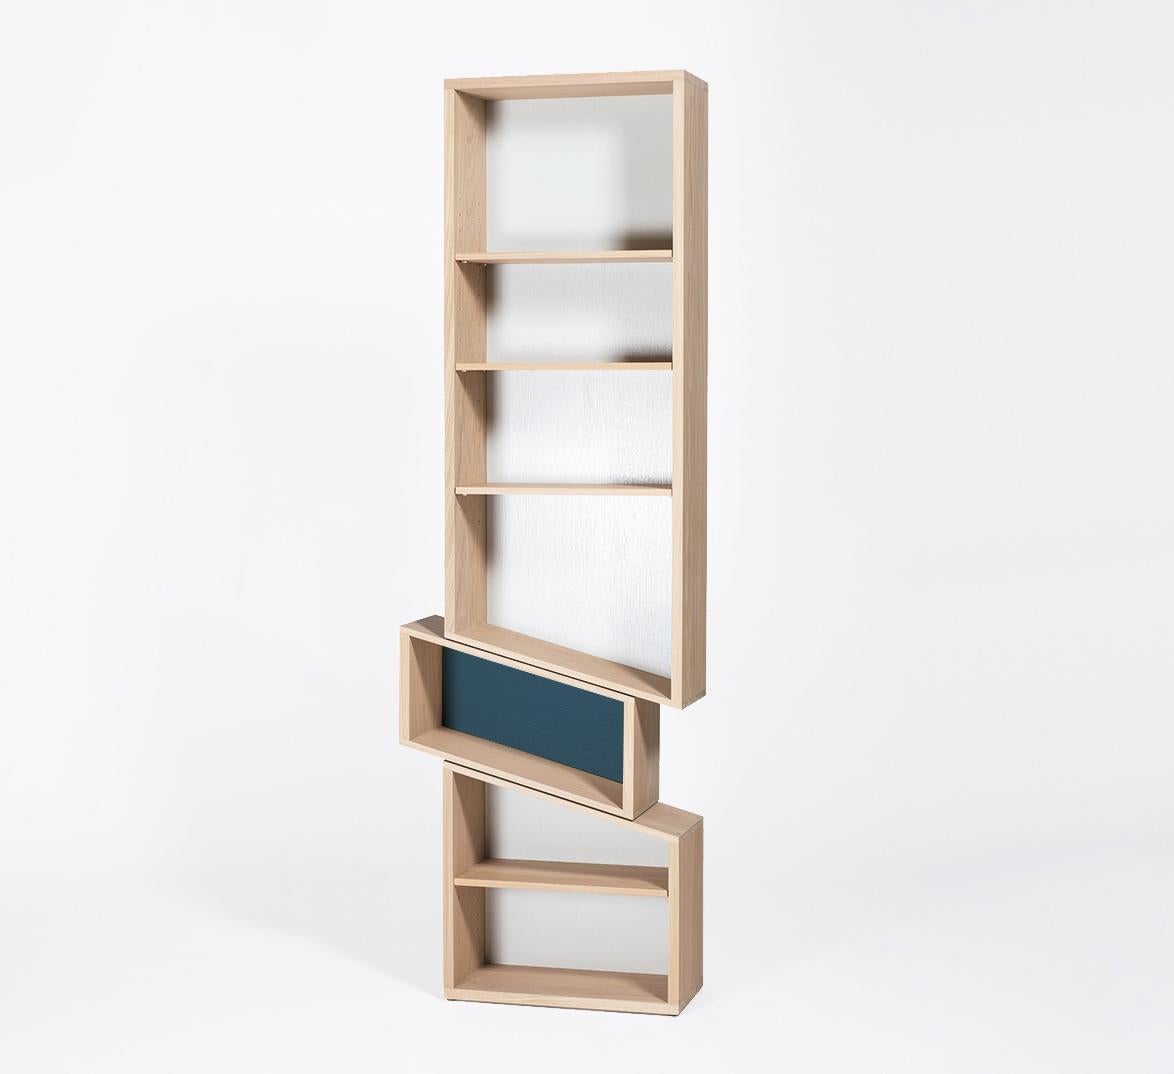 A sliding effect in a straight body gives slide bookcase all its personality. Starting from standard rectangular cases piled up, it becomes a quirky design shelving. No need to have space to have top design, it can fit any room. Colors of the backs